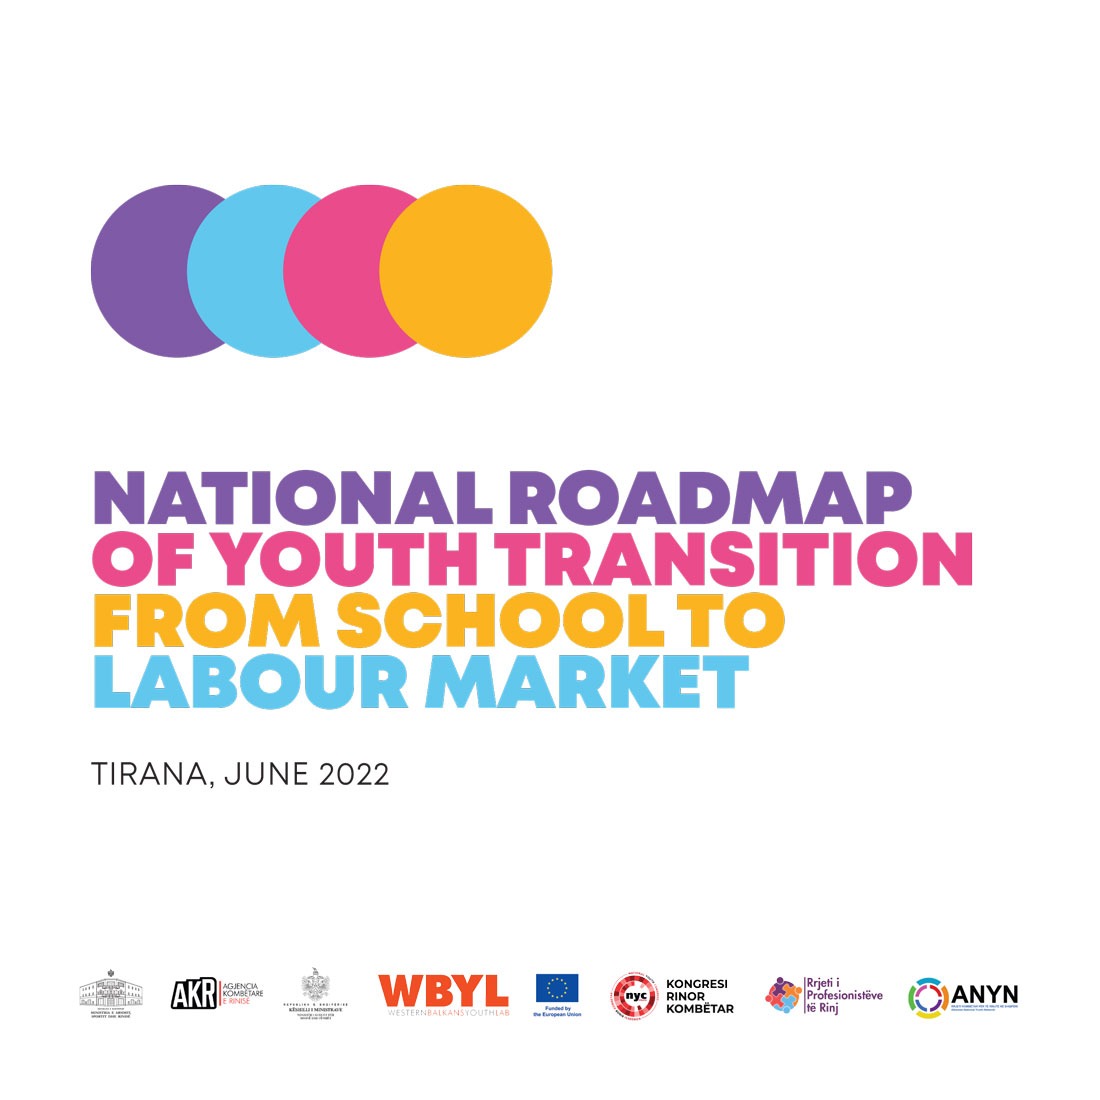 National roadmap of youth transition from school to labour market